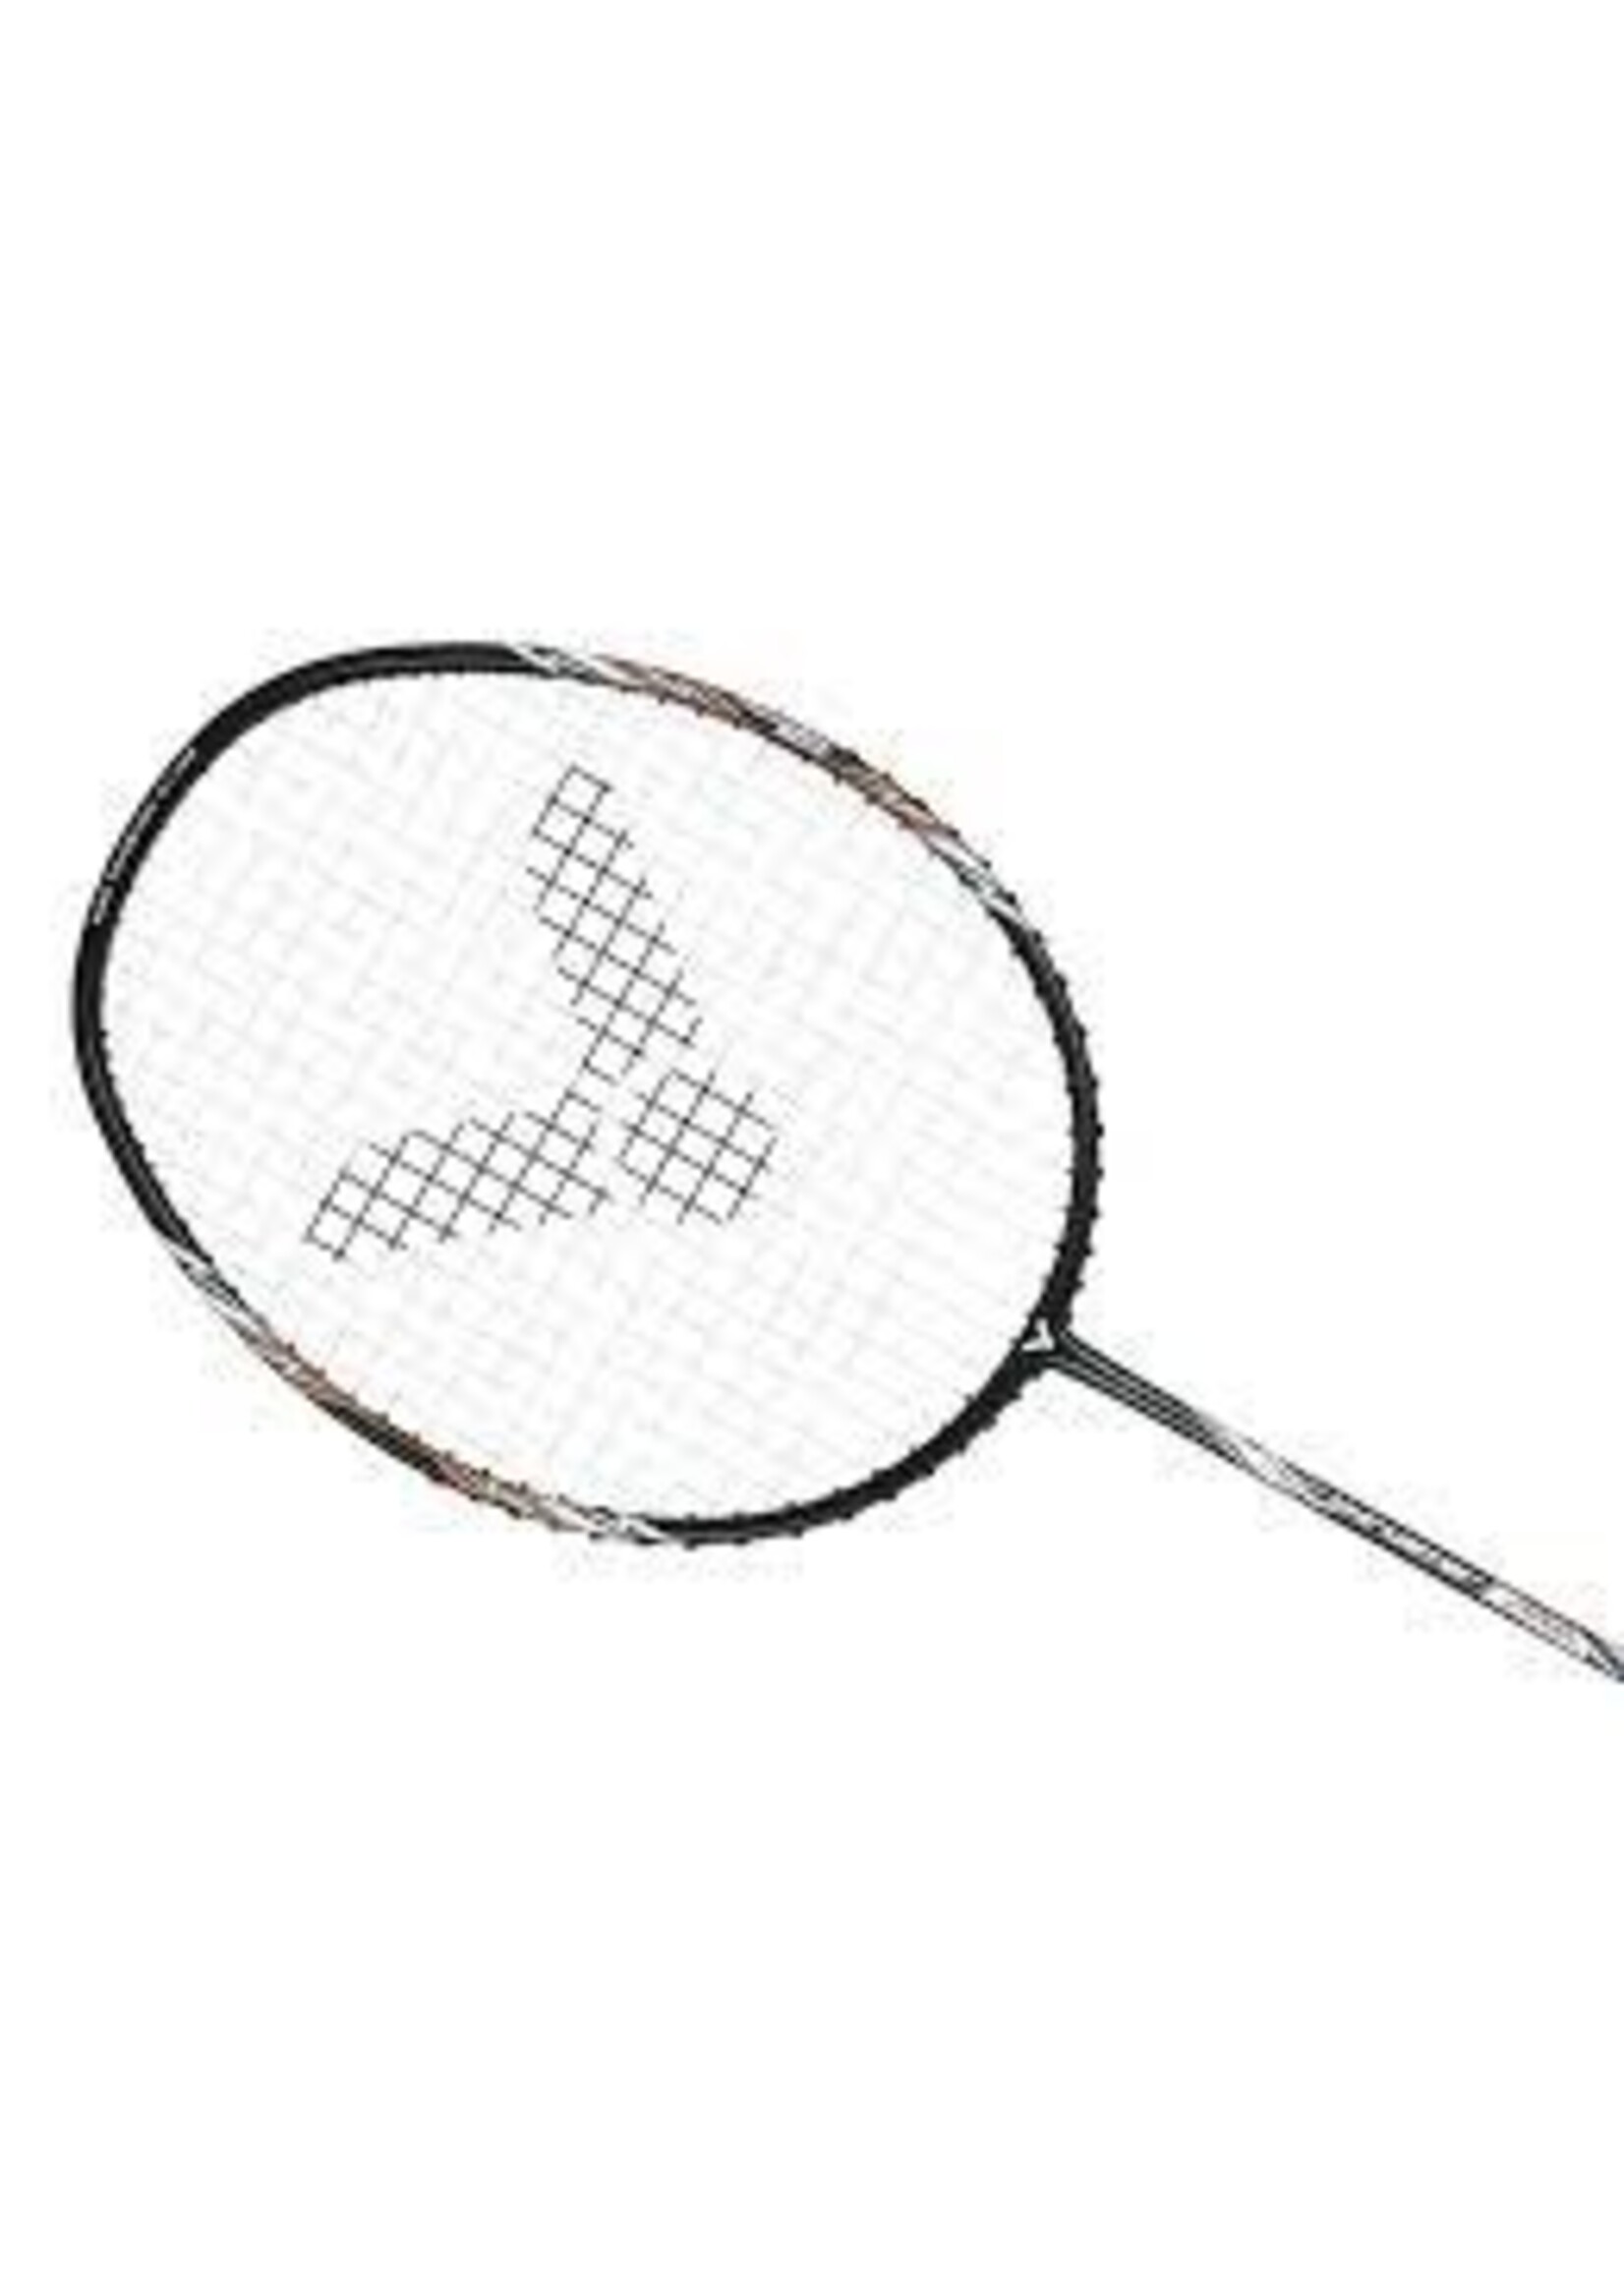 VICTOR VICTOR RACQUET THRUSTER K 05L